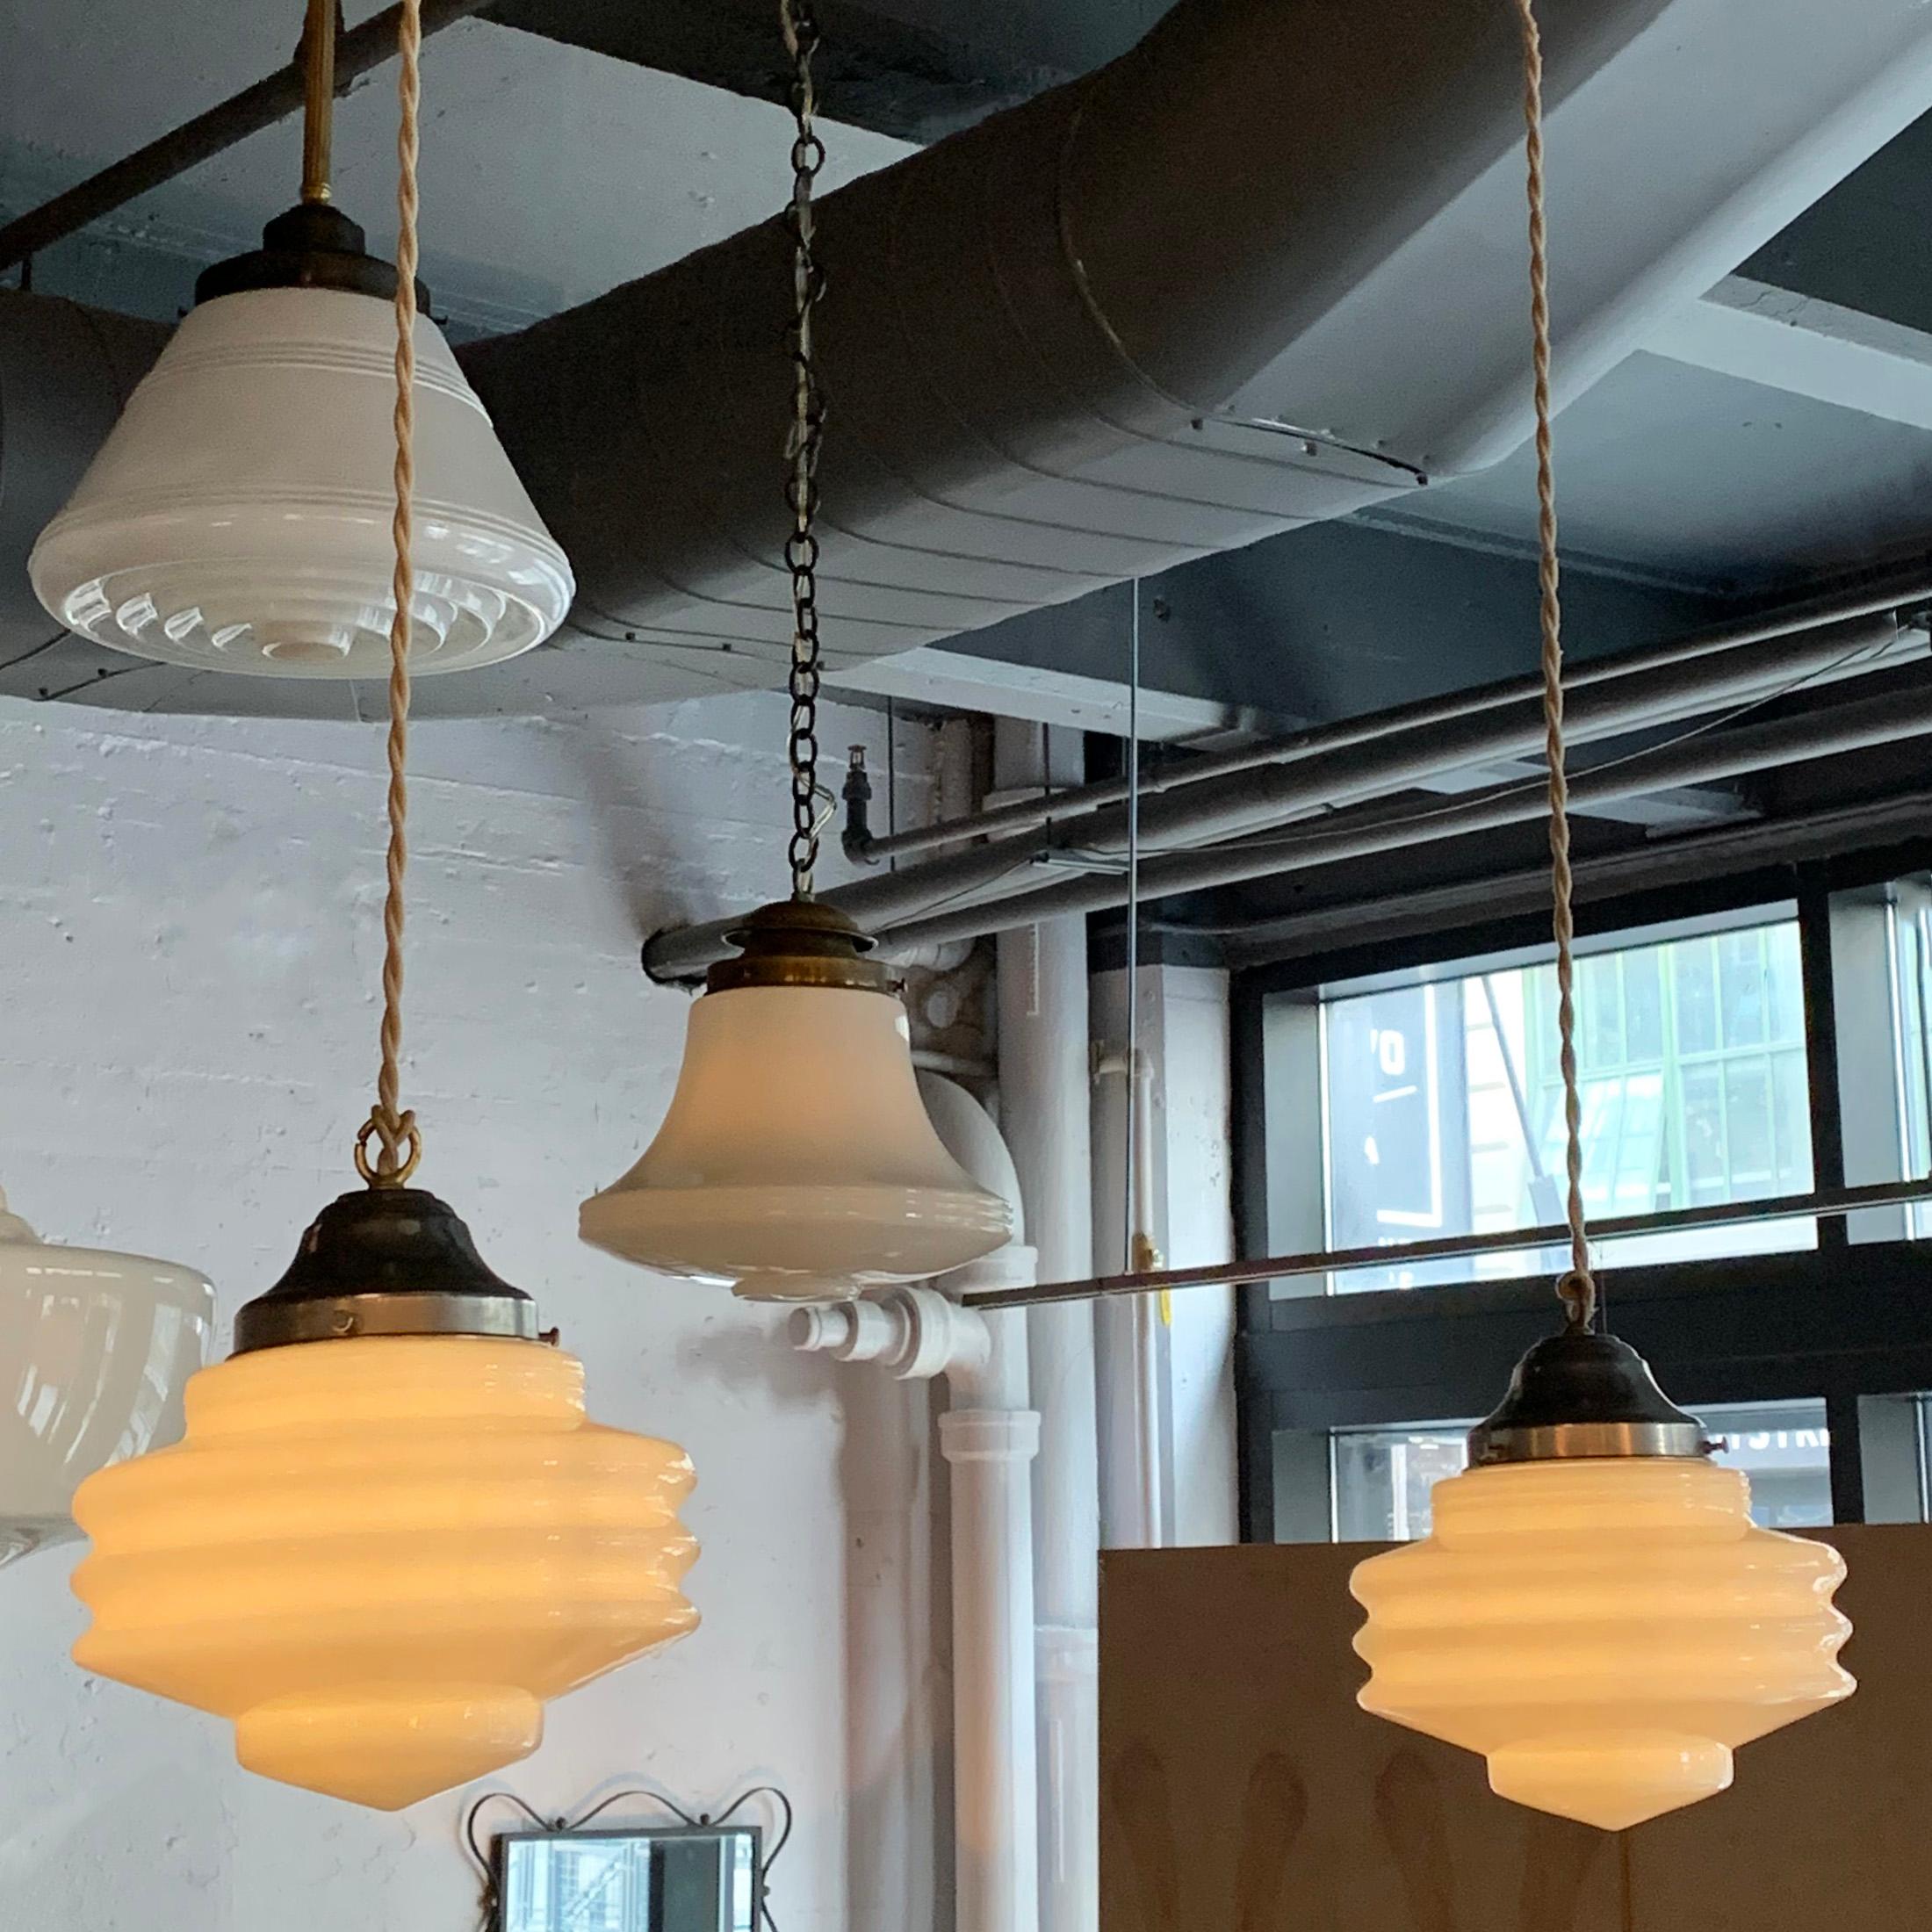 Pair of art deco, ridged milk glass pendant lights with aluminum fitters are newly wired with 64 inches of braided cloth cord to accept up to 150 watt bulbs.